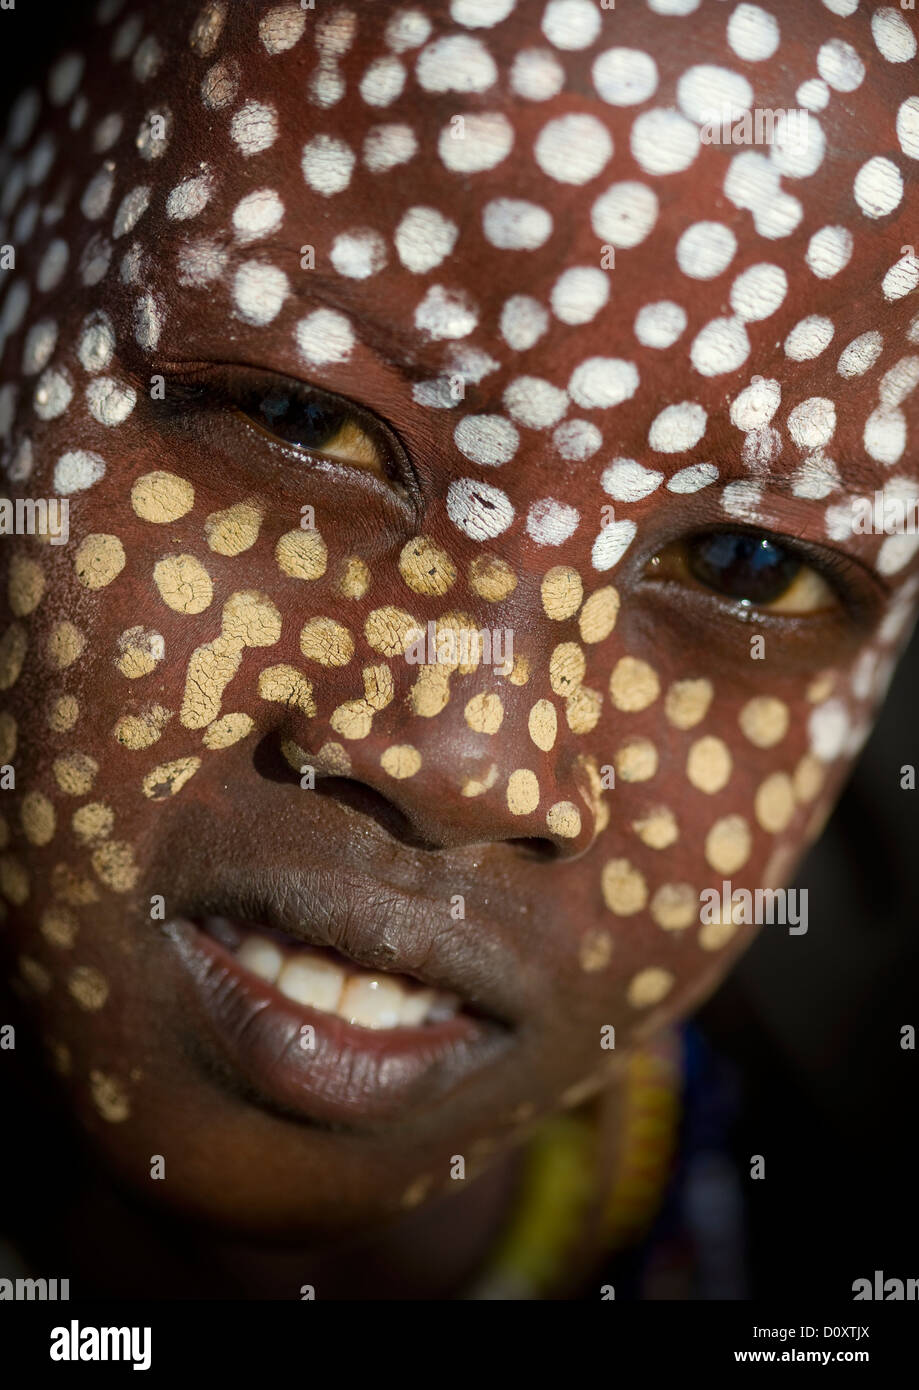 Close Up Portrait Of Erbore Tribe Boy With Face Paint And Toothy Smile, Weito, Omo Valley, Ethiopia Stock Photo